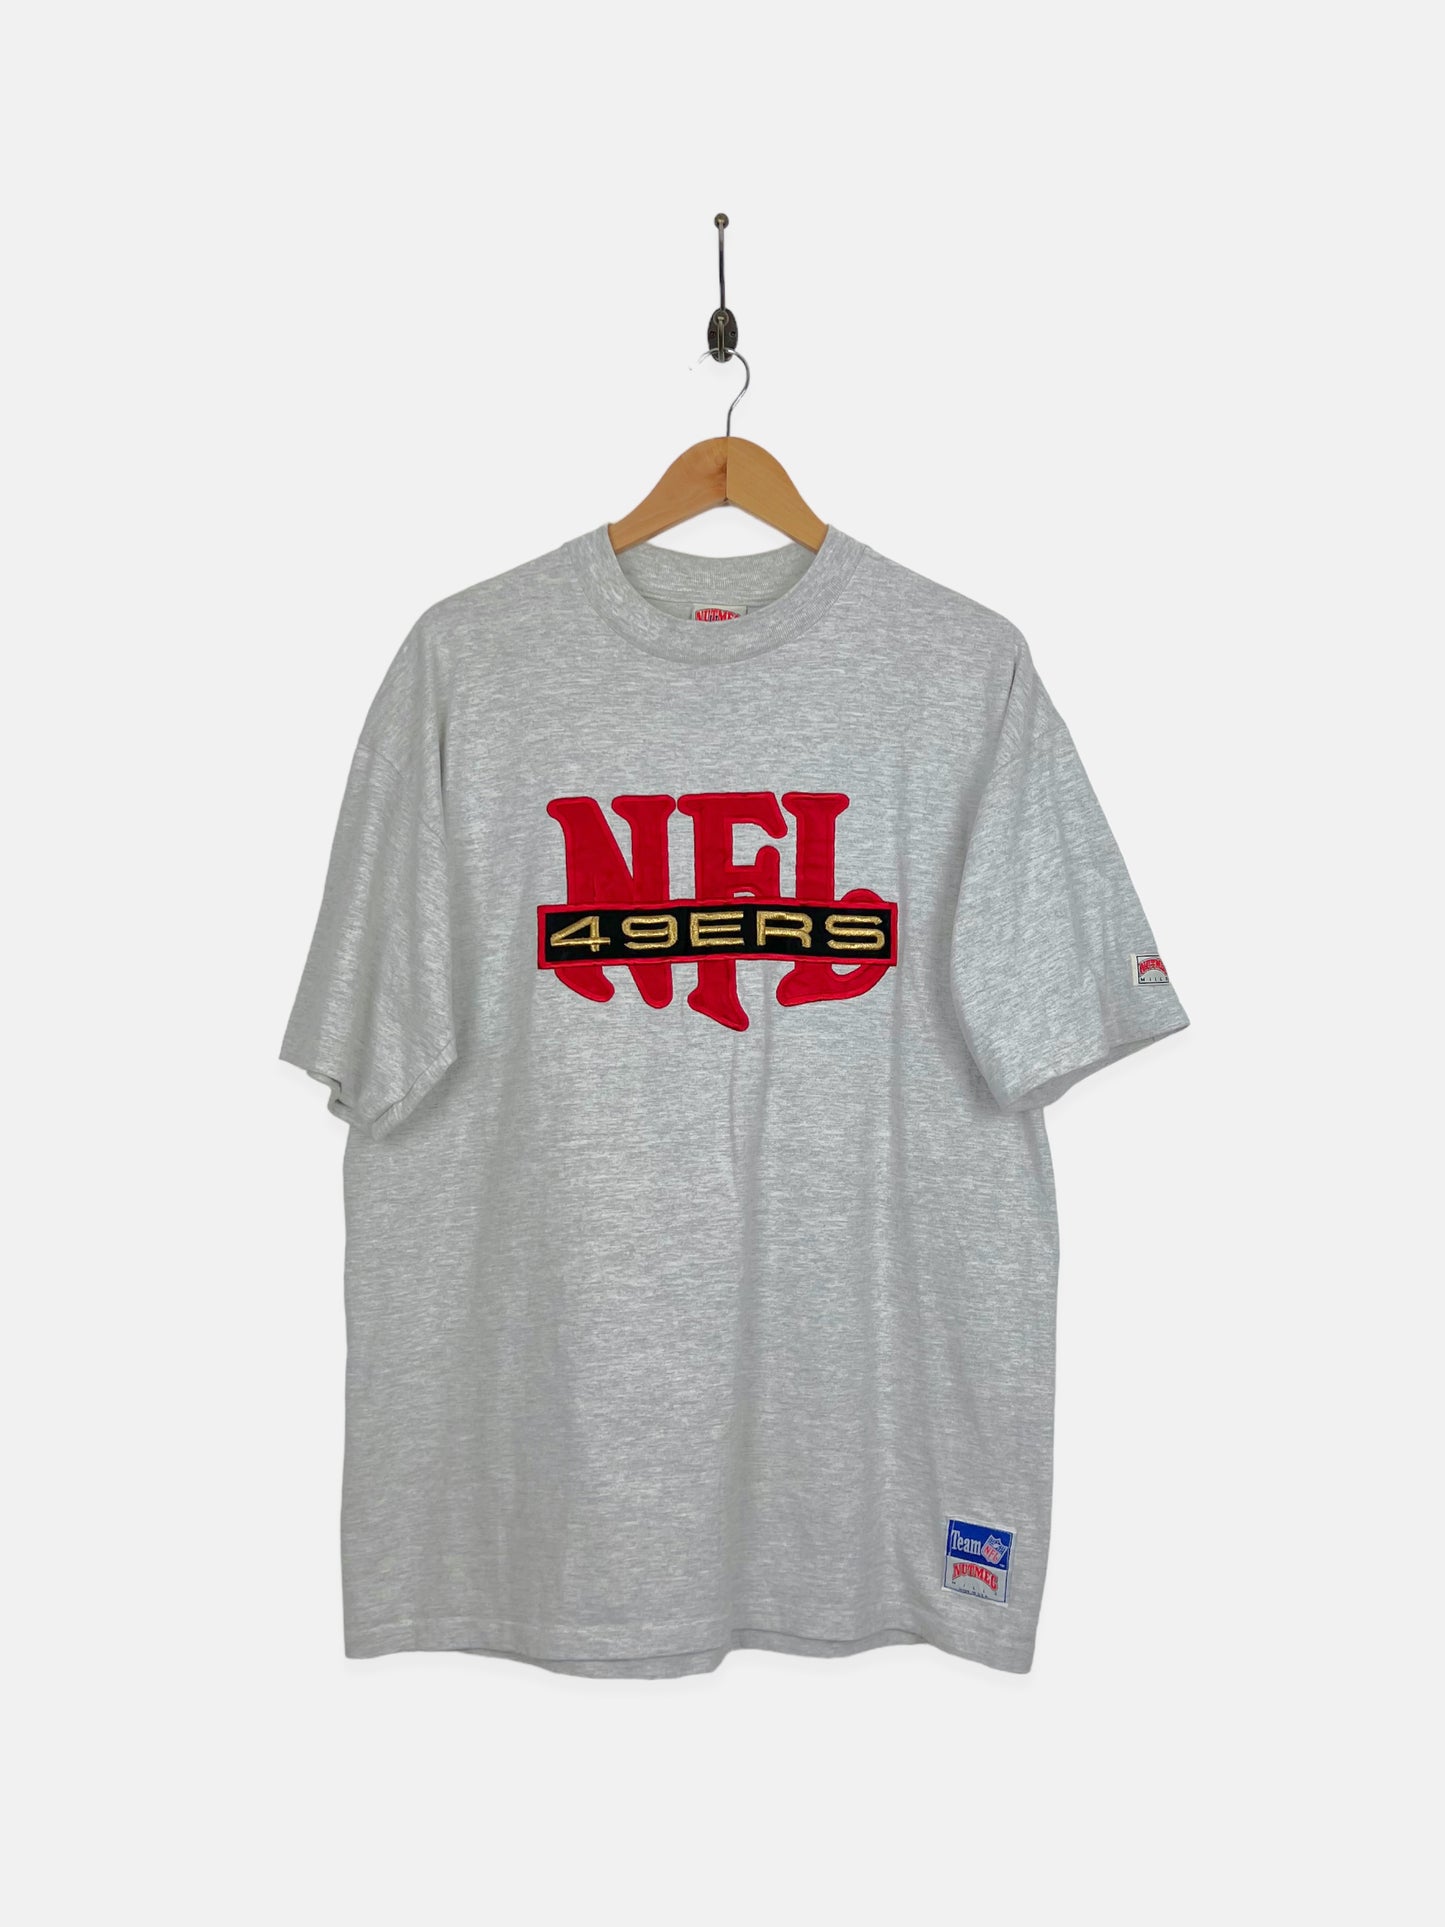 90's San Francisco 49ers NFL USA Made Embroidered Vintage T-Shirt Size XL